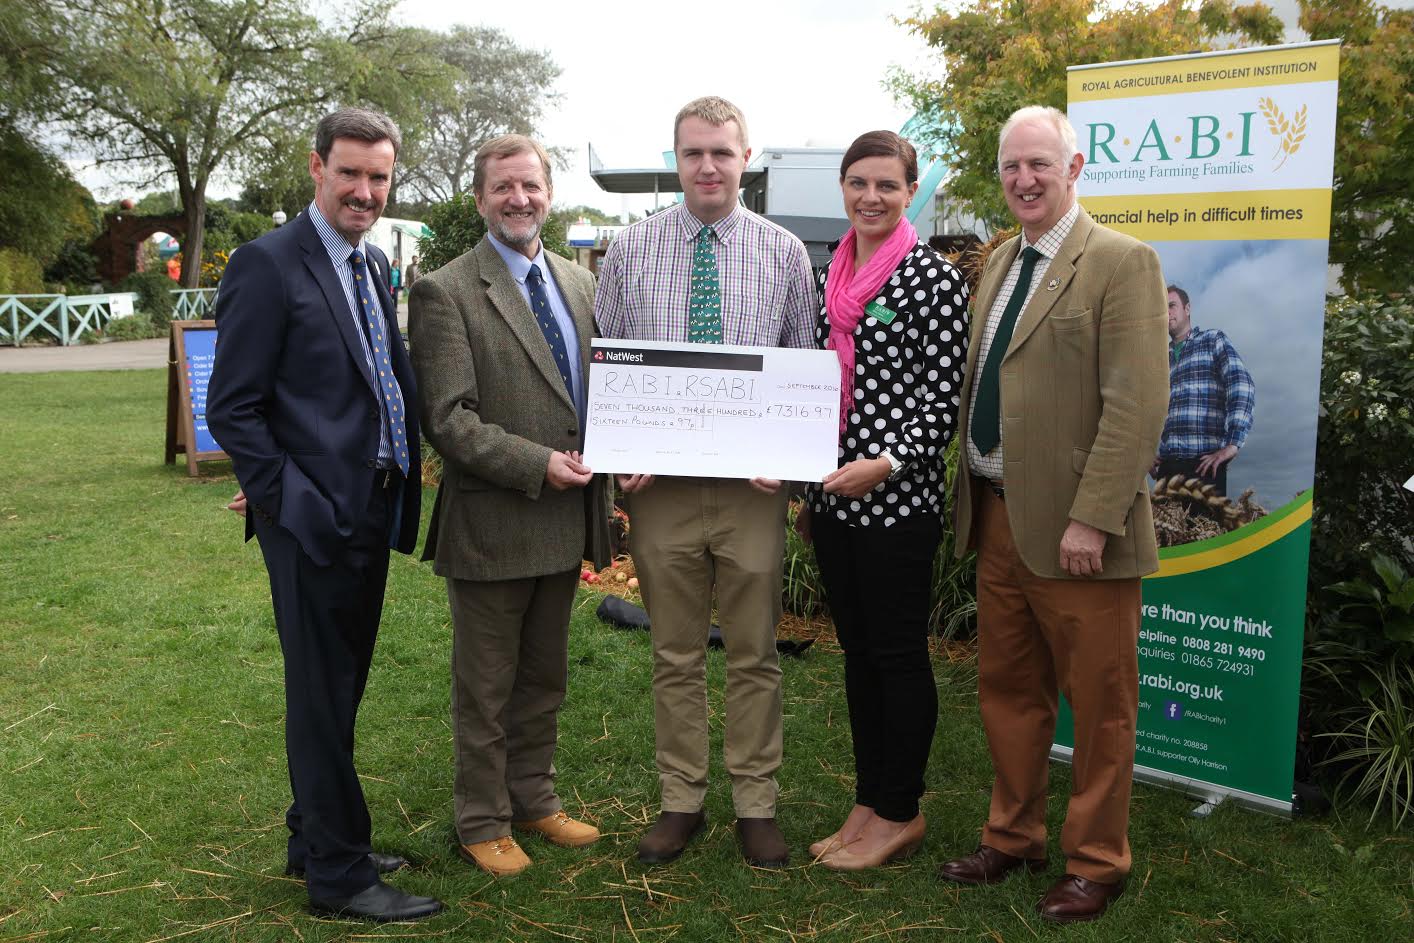 (L-R) Ken Nottage, Chief Executive of the Three Counties Society, Malcolm Thomas MBE, Chairman of RABI, Jack Walton, Becky Davies, RABI Regional Manager and Clive Roads, Livestock Auctioneer at McCartneys